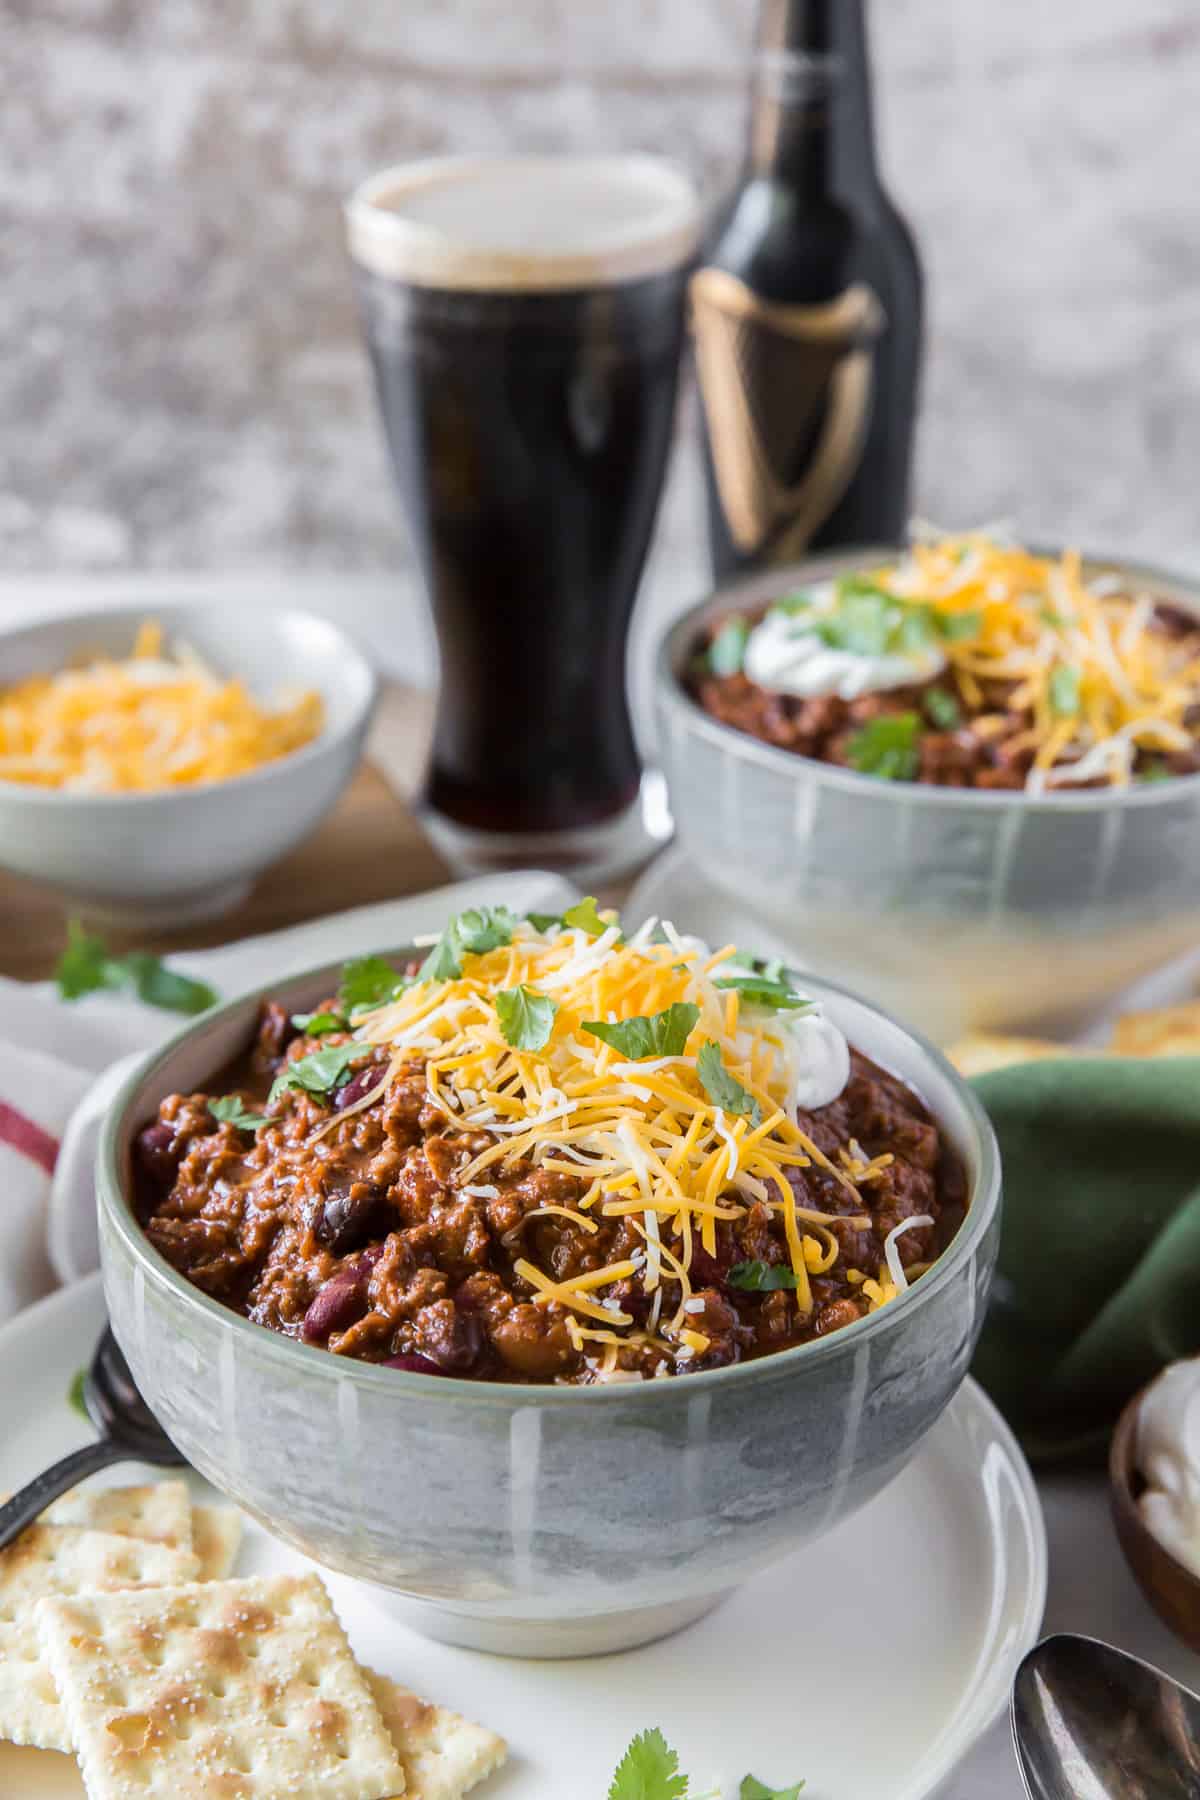 A bowl of chili with a glass of beer in the background.